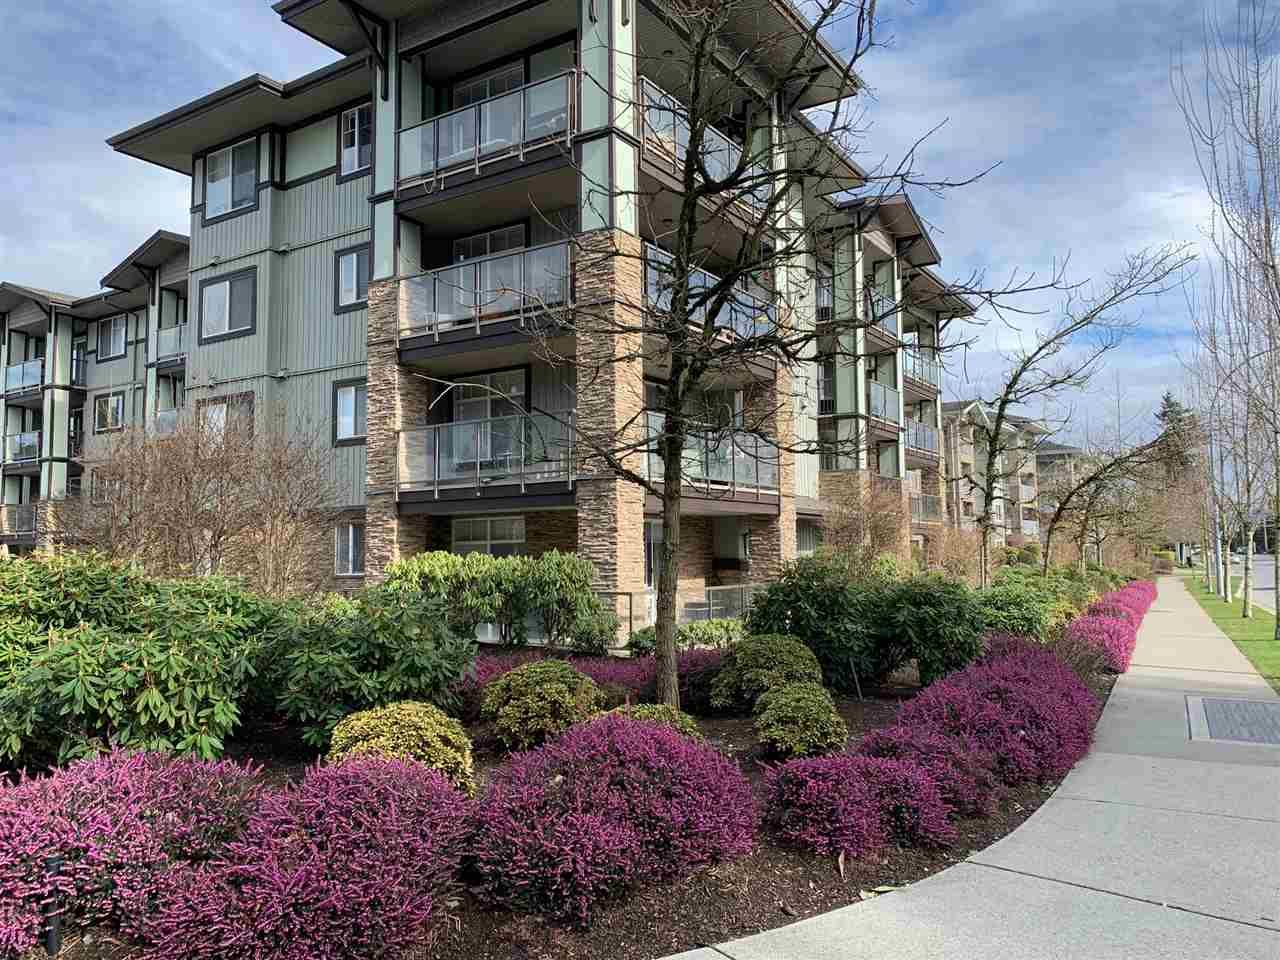 Main Photo: 111 2038 SANDALWOOD CRESCENT in Abbotsford: Central Abbotsford Condo for sale : MLS®# R2443524